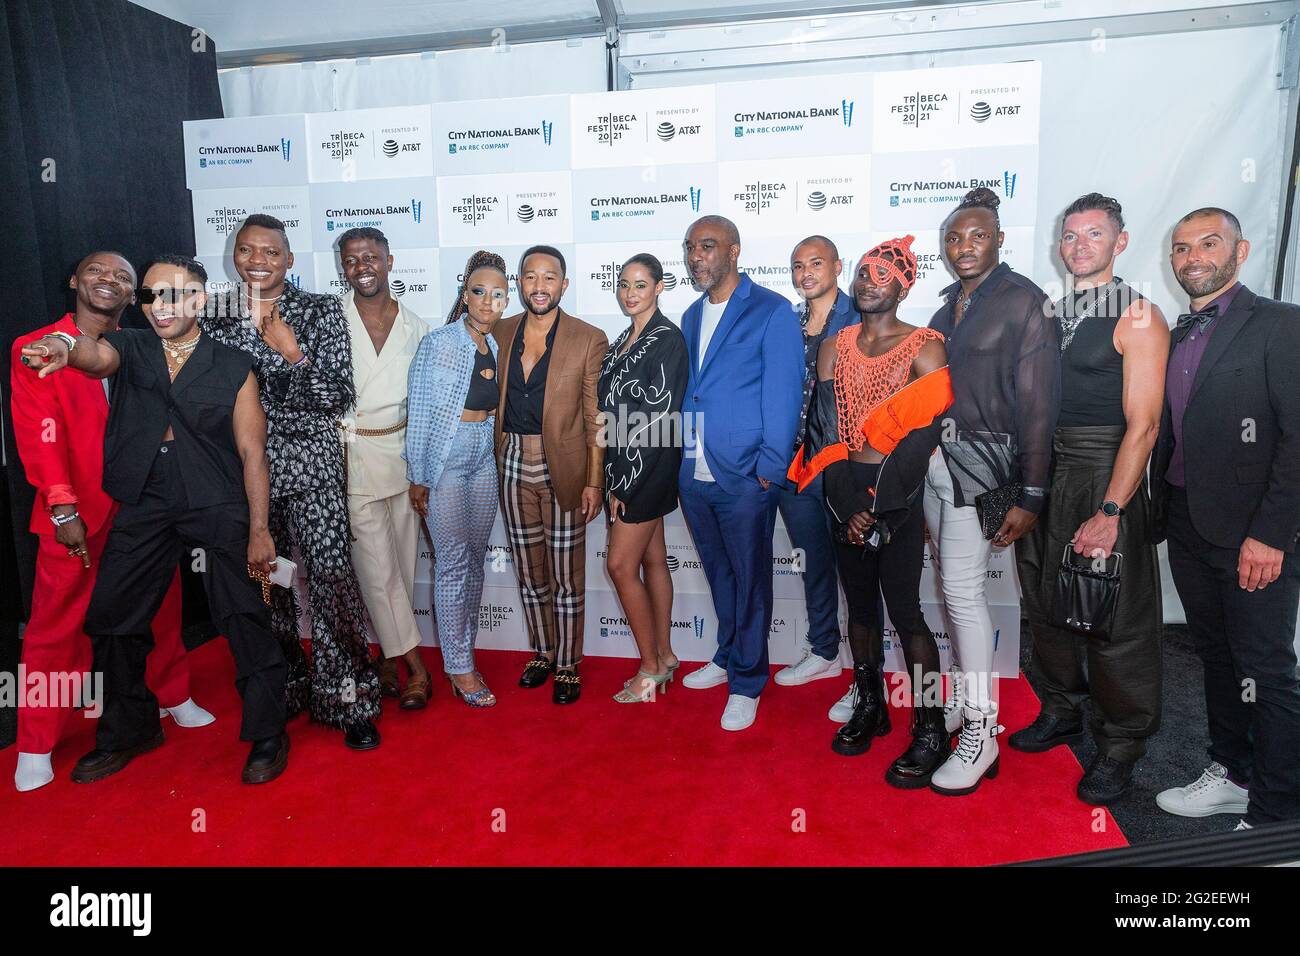 New York, United States. 10th June, 2021. Crew and subjects pose during The Legend of the Underground premiere at Tribeca Film Festival at Waterfront Plaza, Battery Park City. John Legend, producer of the film is 6th from the left, directors Nneka Onuorah (5th on the left) and Giselle Bauley (7th on the left). (Photo by Lev Radin/Pacific Press) Credit: Pacific Press Media Production Corp./Alamy Live News Stock Photo